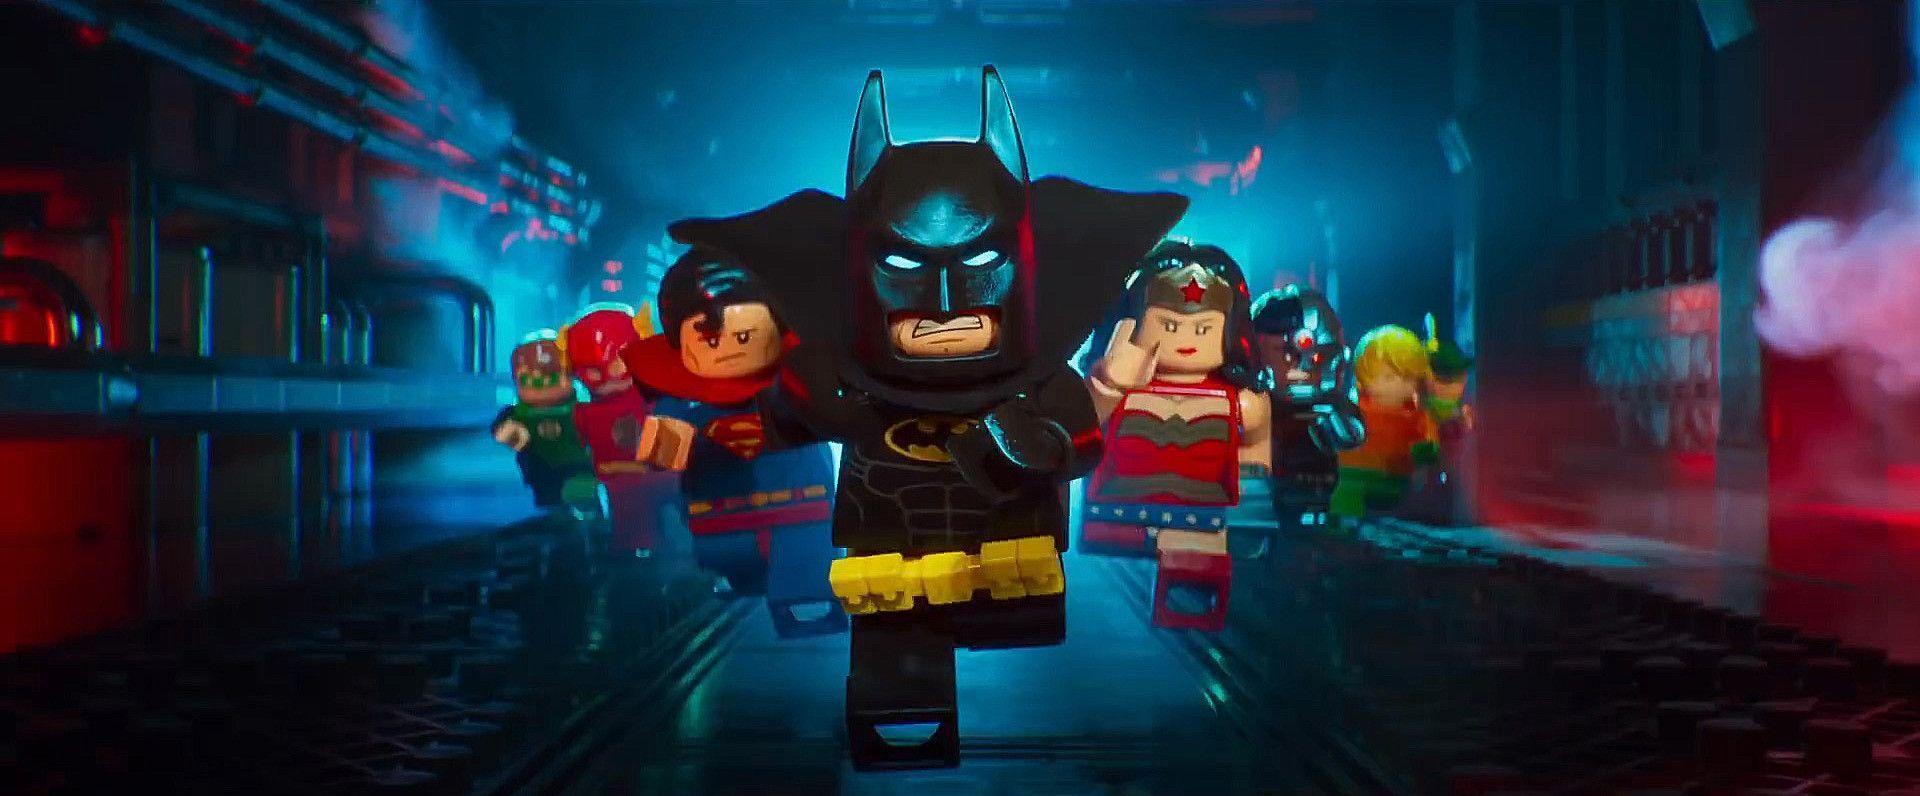 The Lego Batman Movie 2017 directed by Chris McKay  Film review